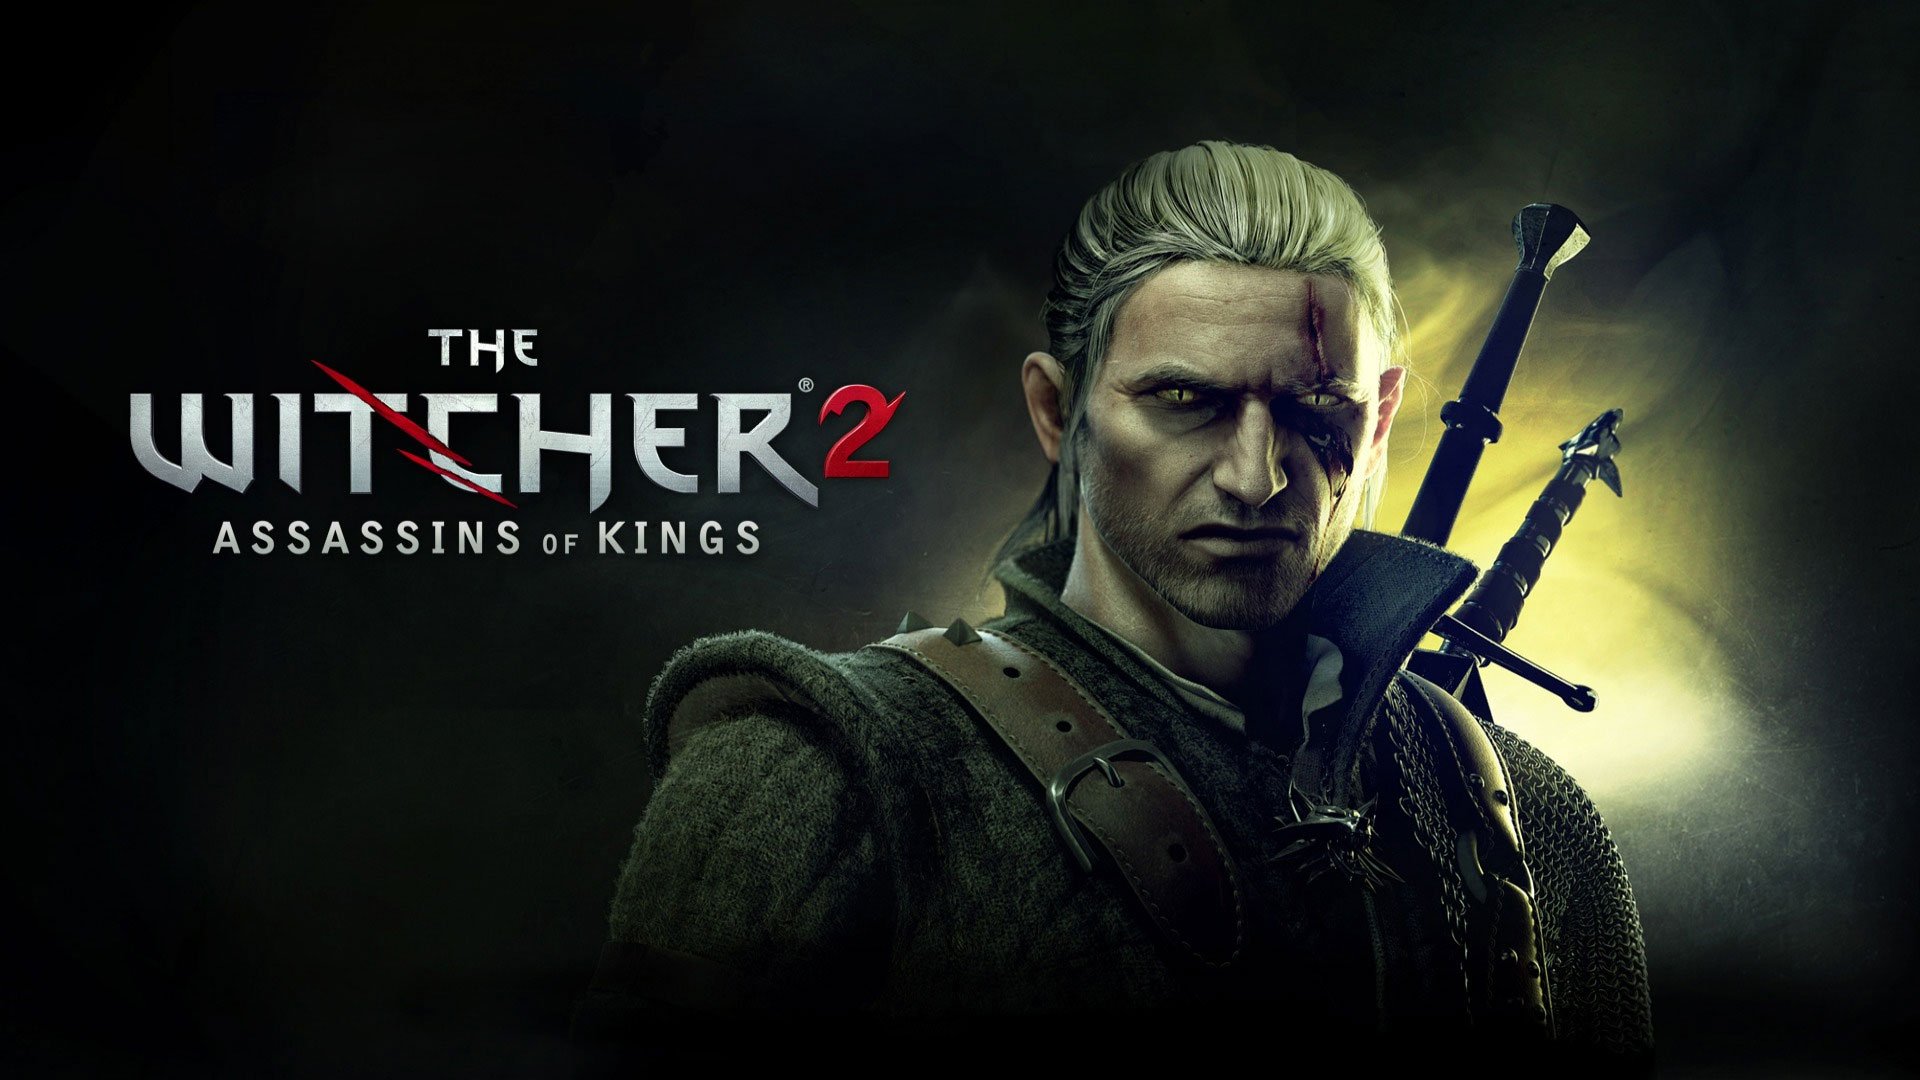 Witcher 2 Wallpapers in HD Page 1 1920x1080